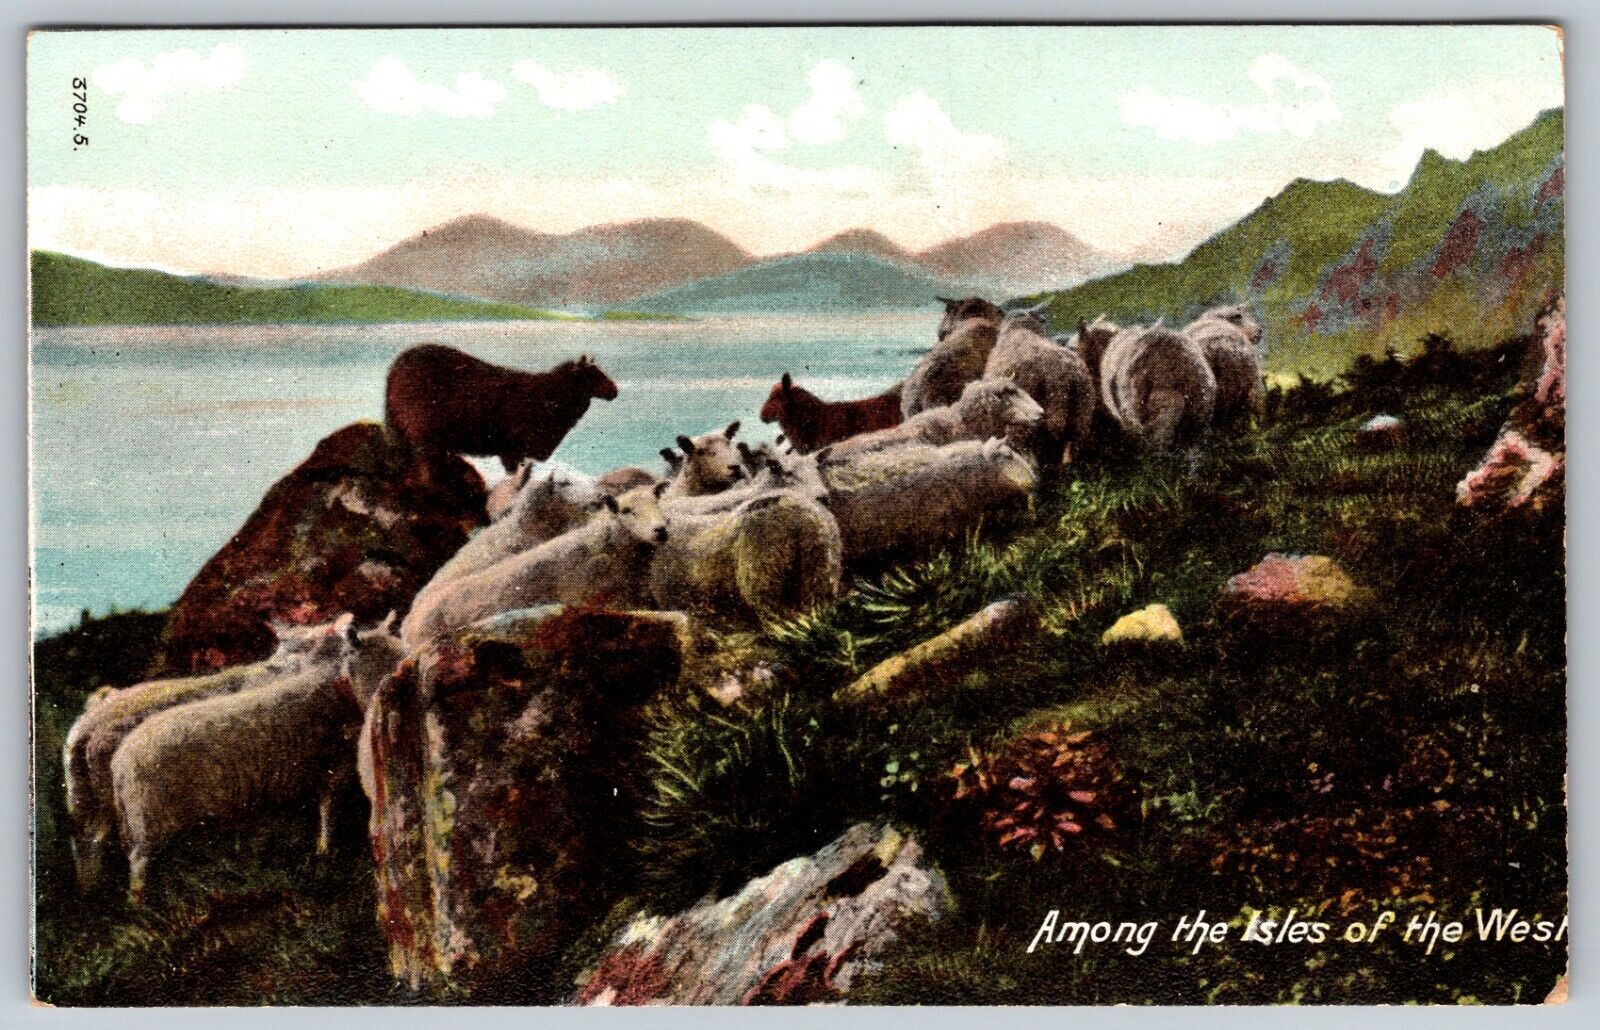 EARLY MORNING SCOTTISH LOCH AMONG THE ISLES OF THE WEST VINTAGE POSTCARD